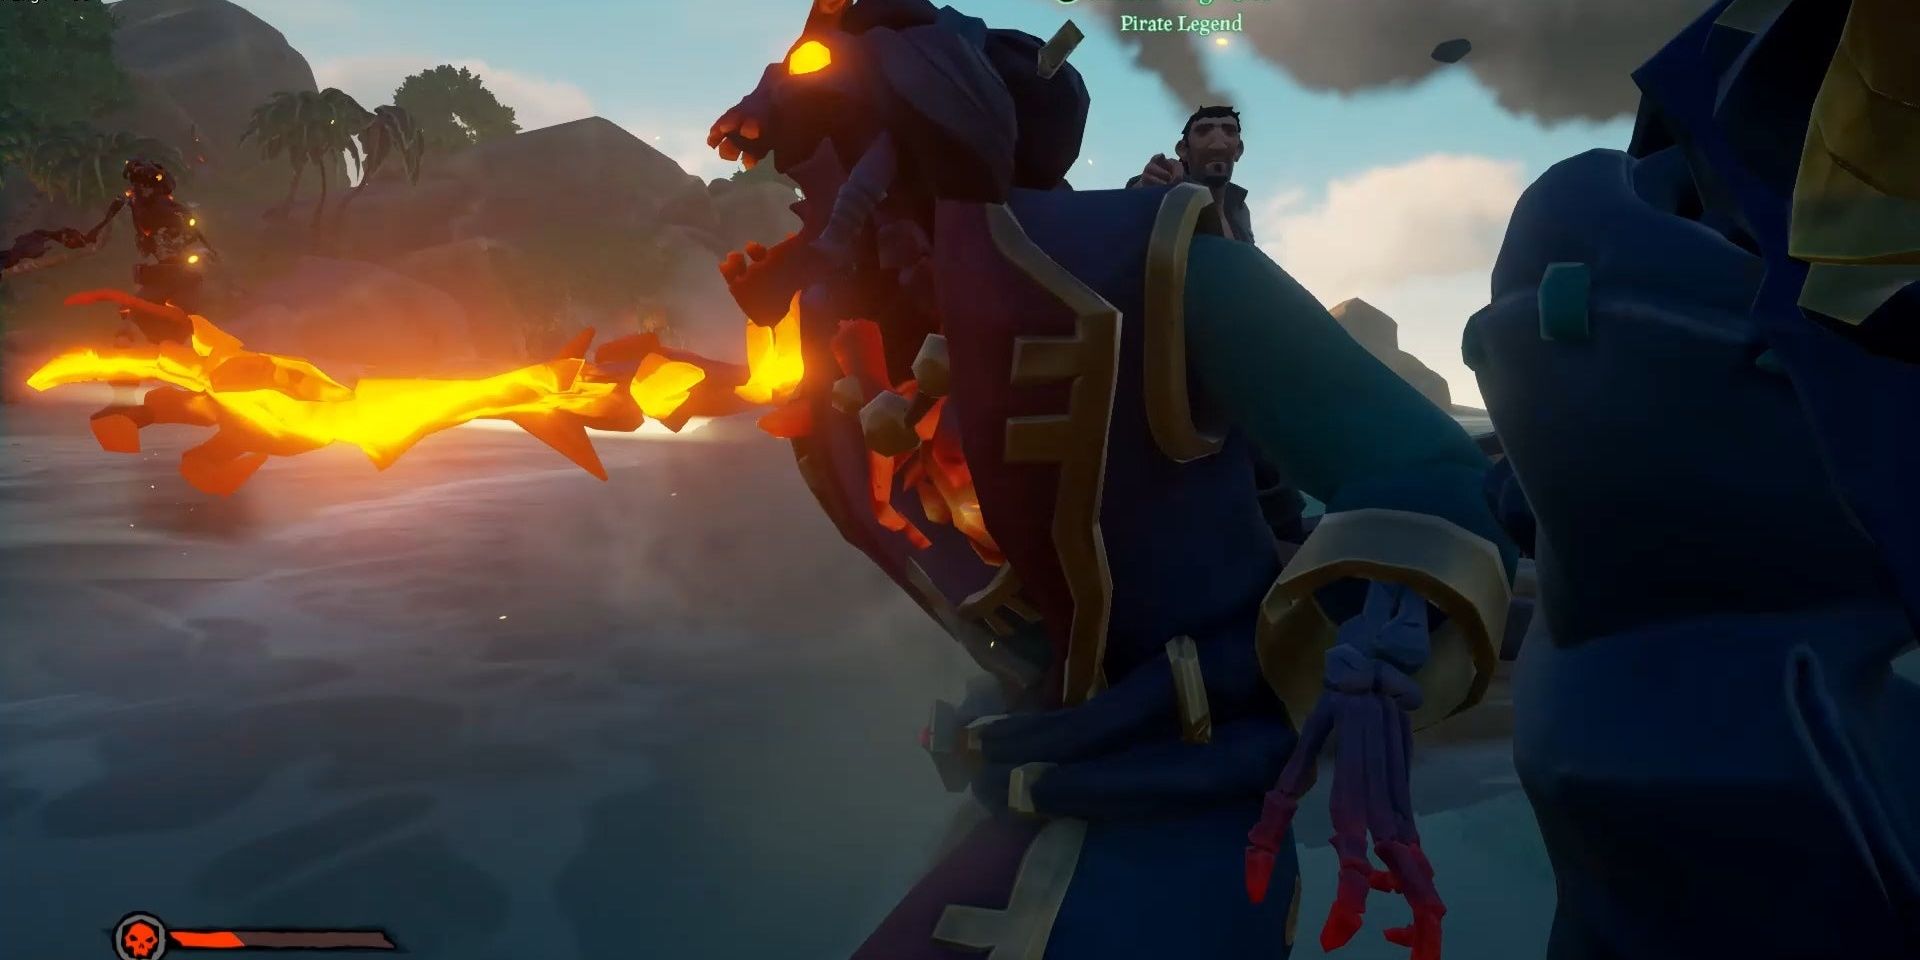 Warden Chi screaming in Sea of Thieves